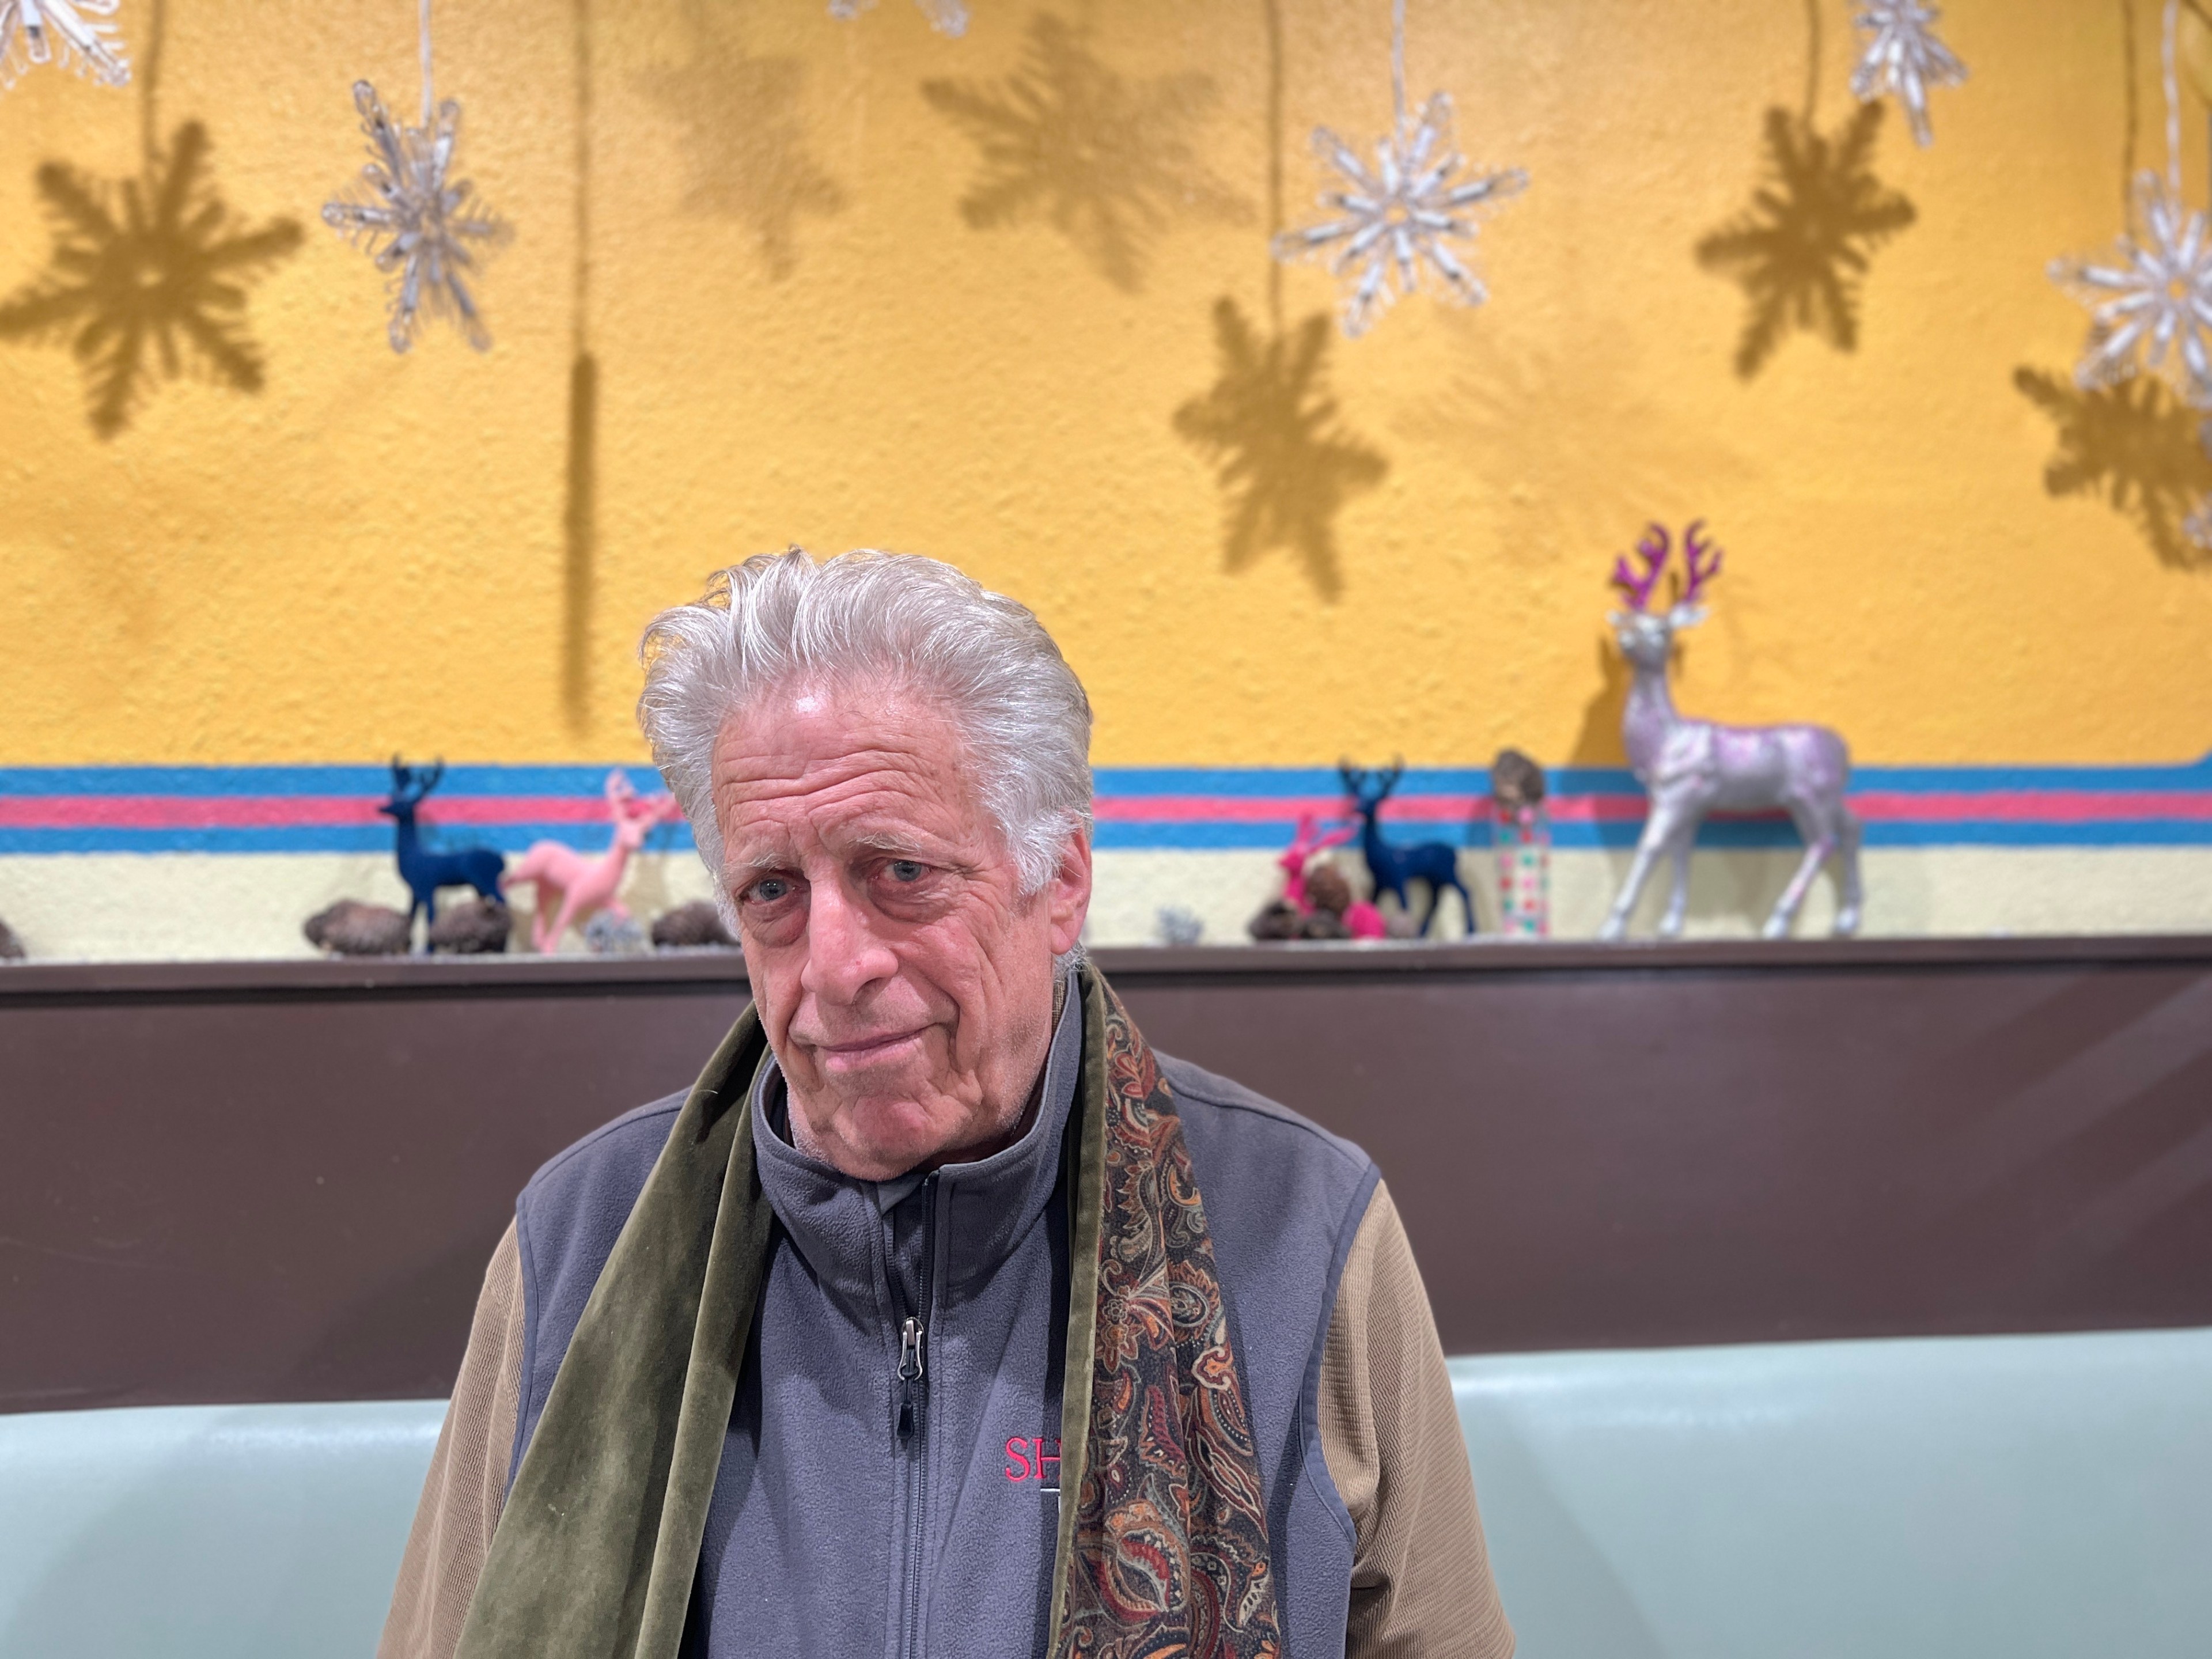 A man with white hair and a blue vest sits in a booth with reindeer and snowflakes behind him.